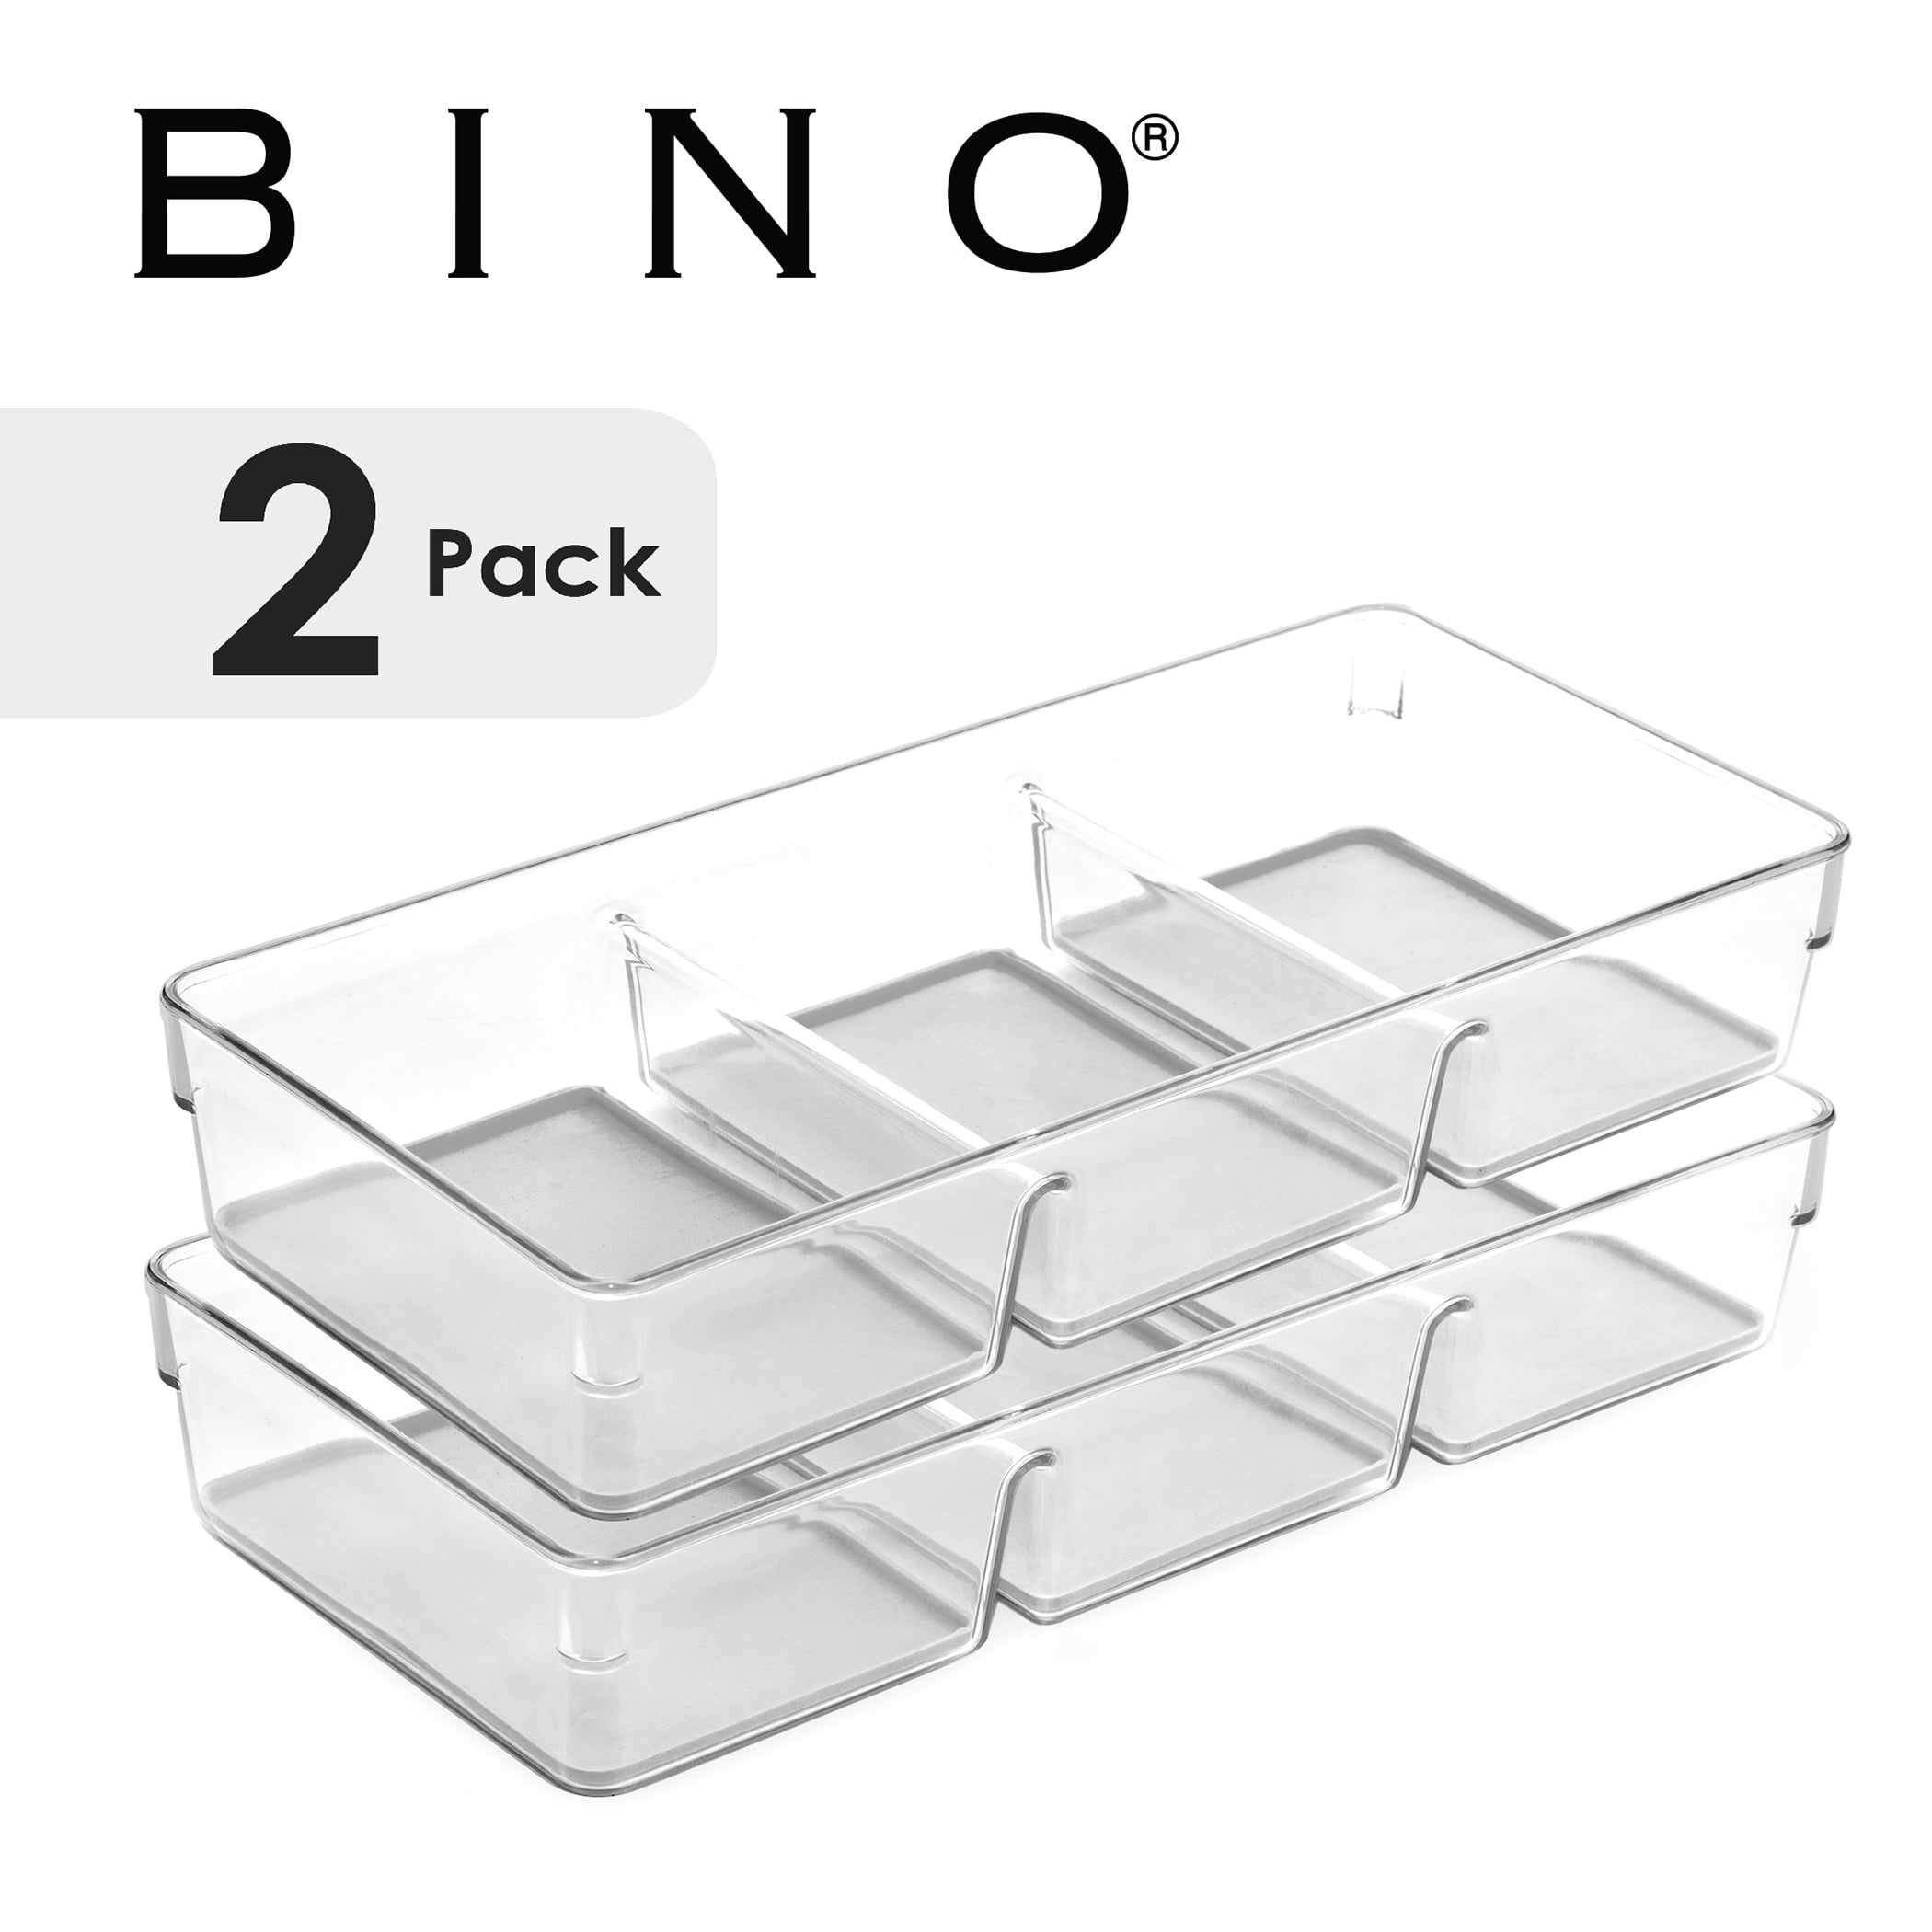  Vtopmart 4 Pack Stackable Makeup Organizer Storage Drawers and  3 Pack 2 Tier Bathroom Under Sink Organizers and Storage : Home & Kitchen